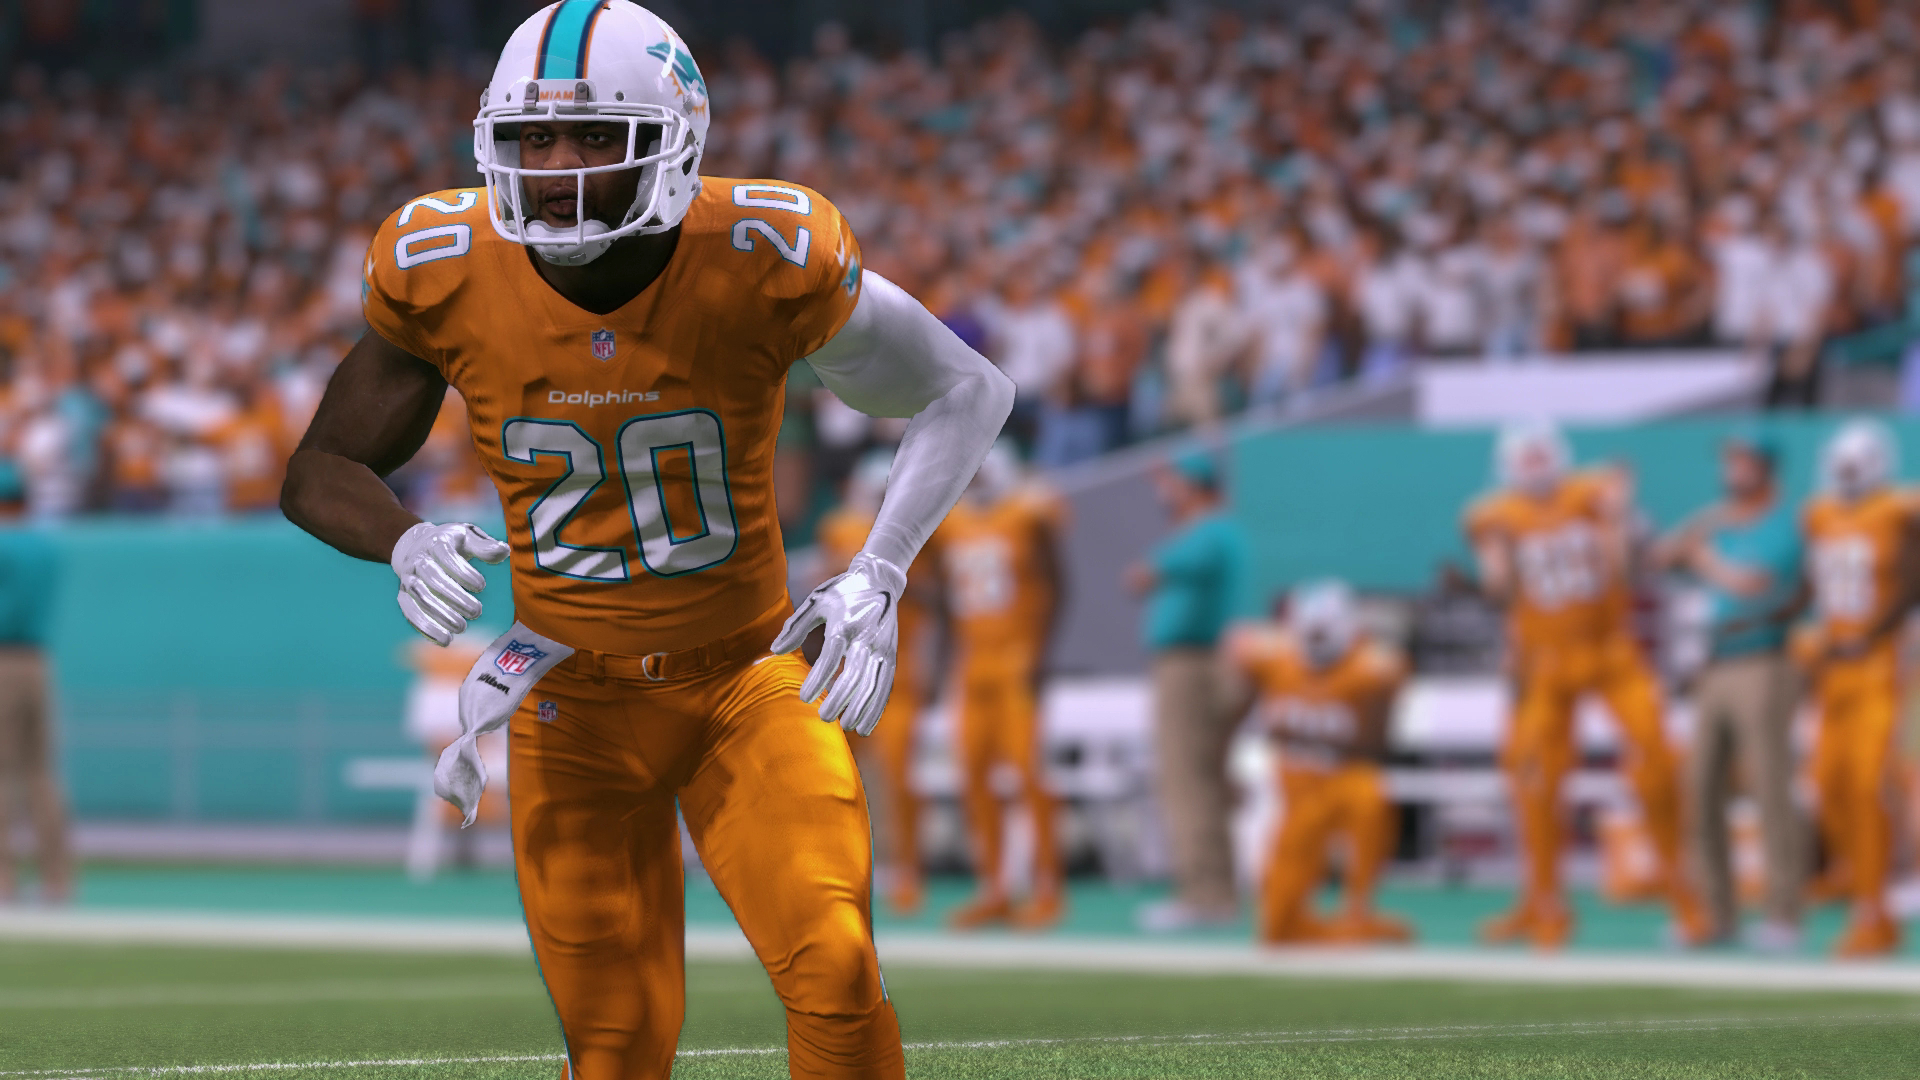 miami dolphins color rush jersey for sale